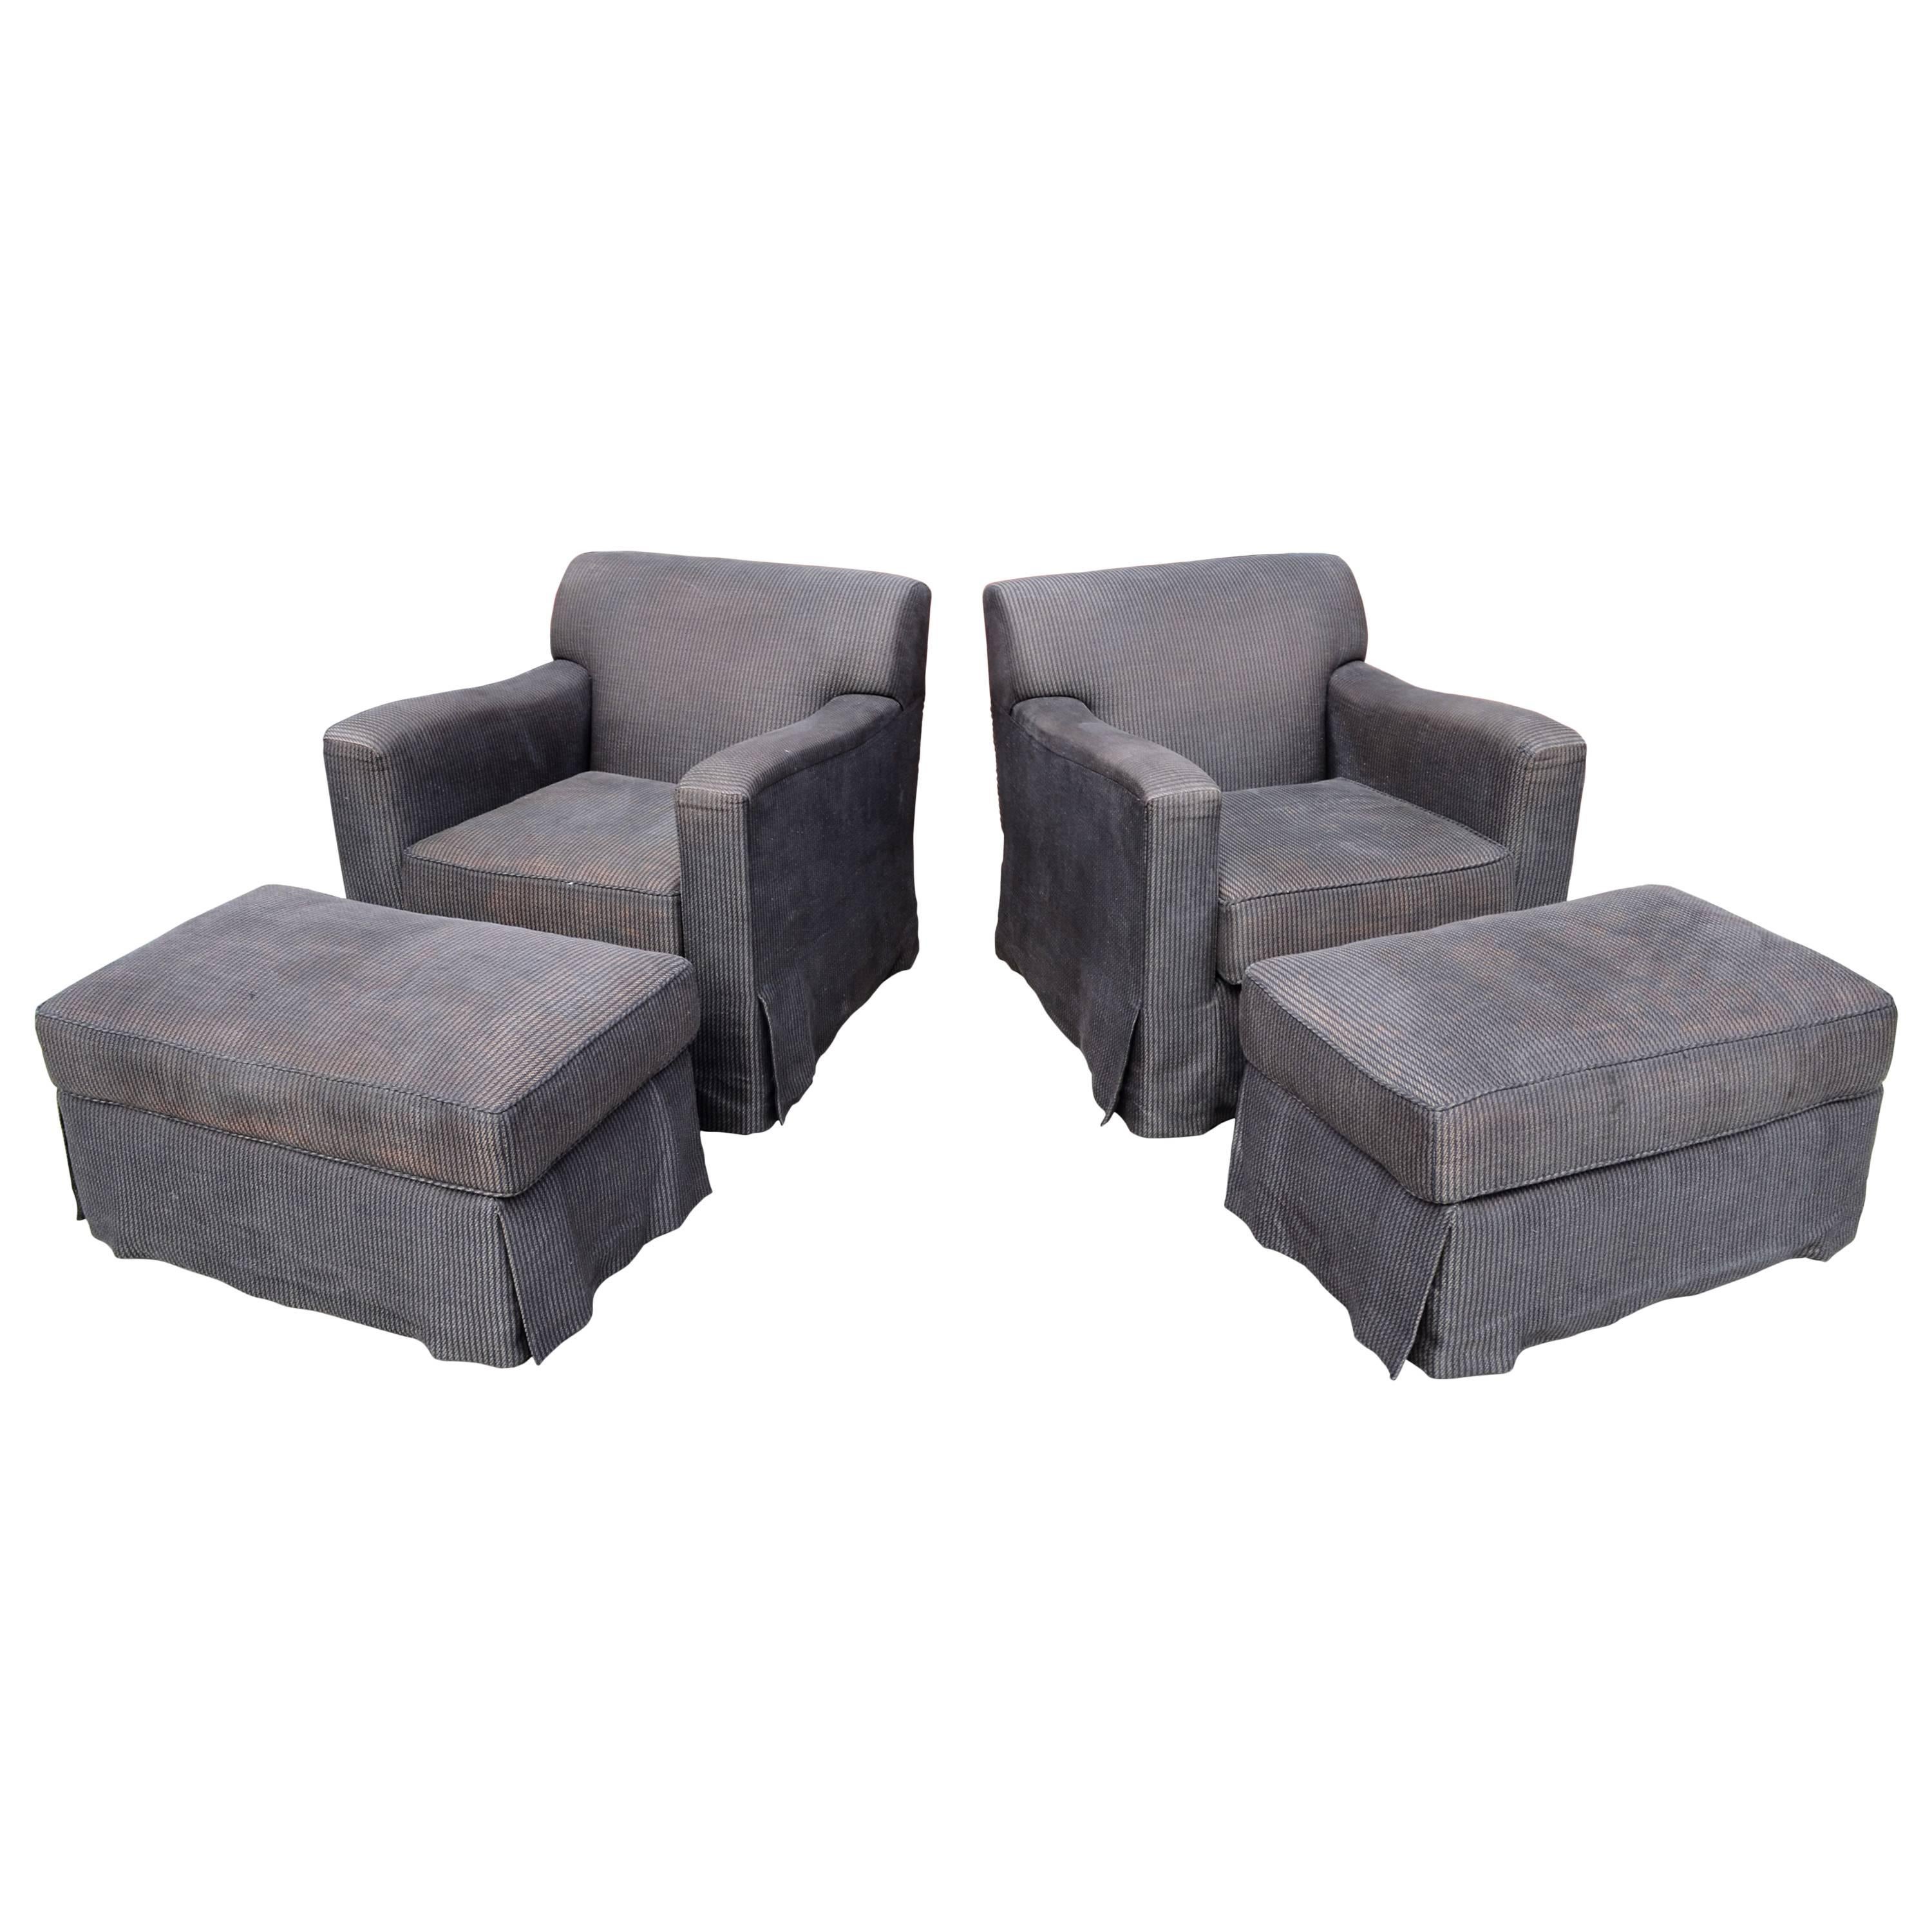 Pair of Christian Liaigre for Holly Hunt Arm Chairs with Ottomans